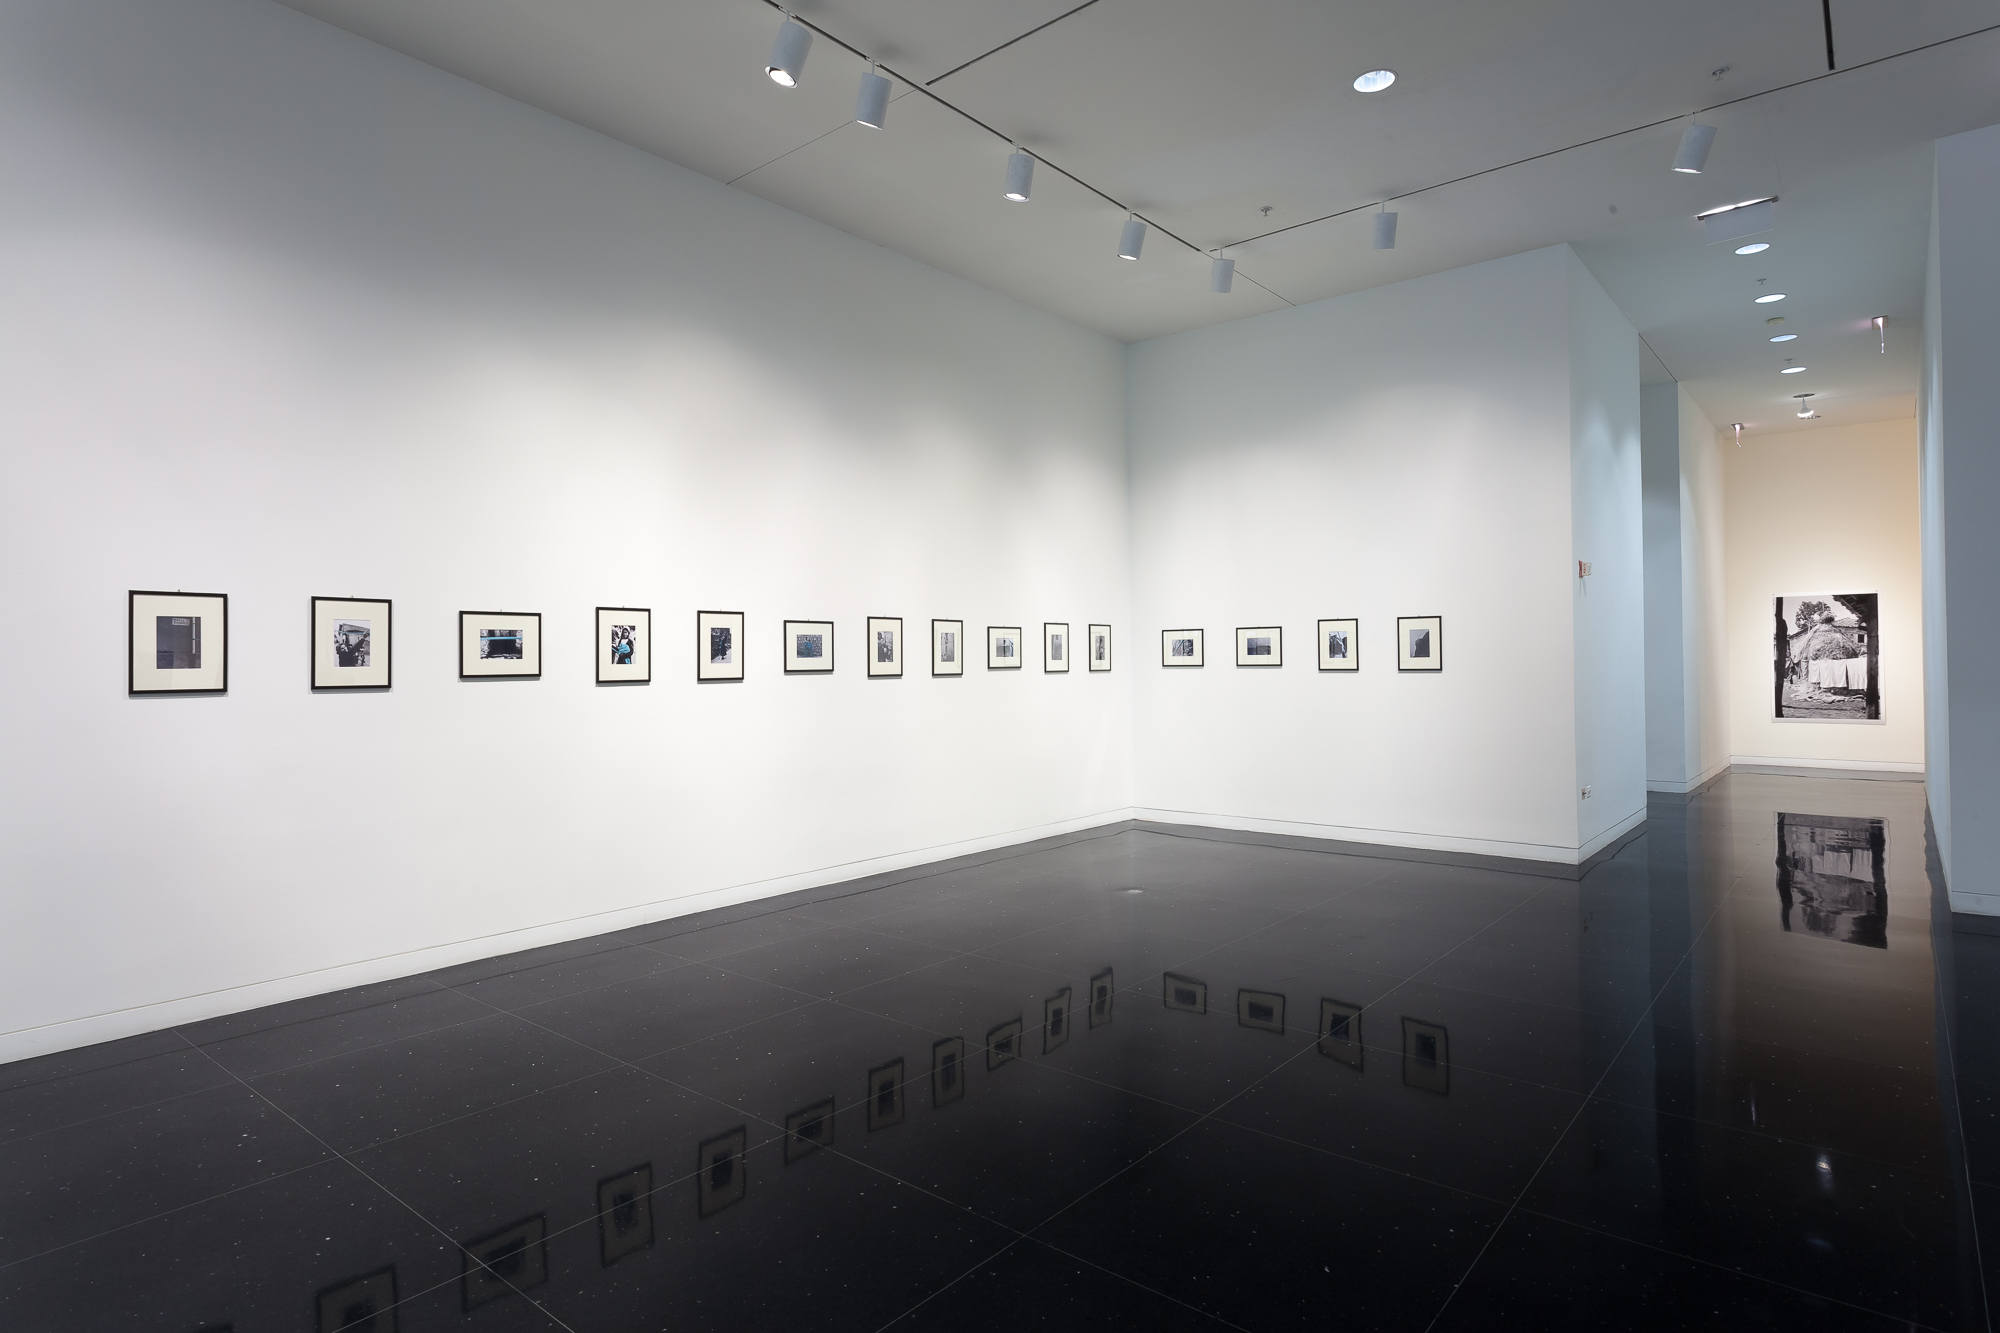 Fifteen images in black frames of the same size arranged in a horizontal line form an L shape across two intersecting gallery walls.